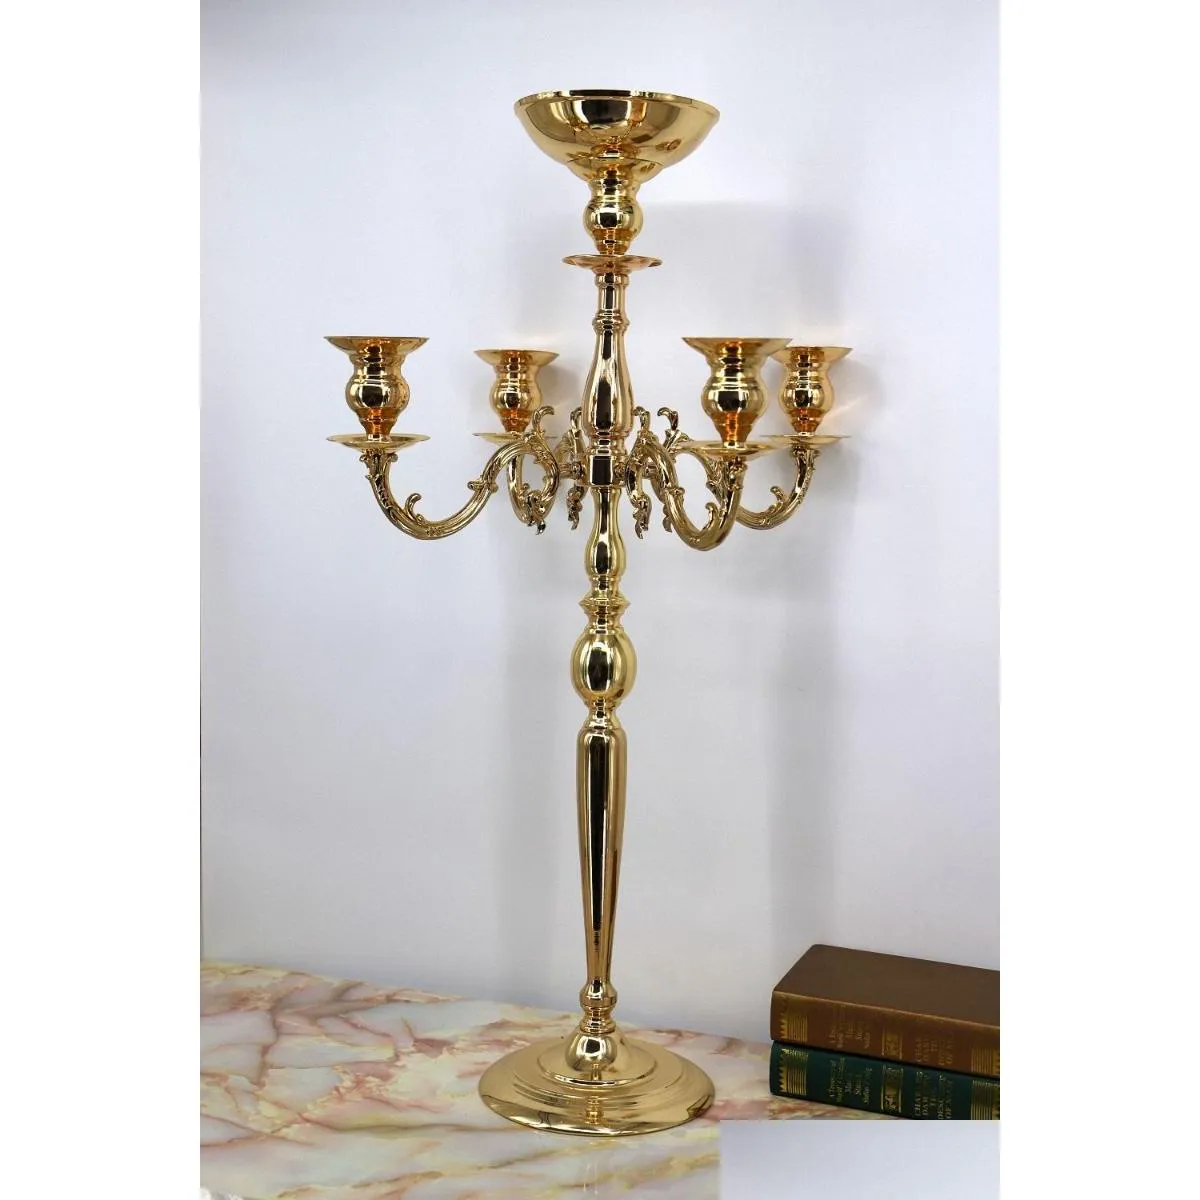 party decoration 85 cm tall metal 5 arm candelabra with flower bowl candle holder rack wedding table centerpiece decorations iron vase